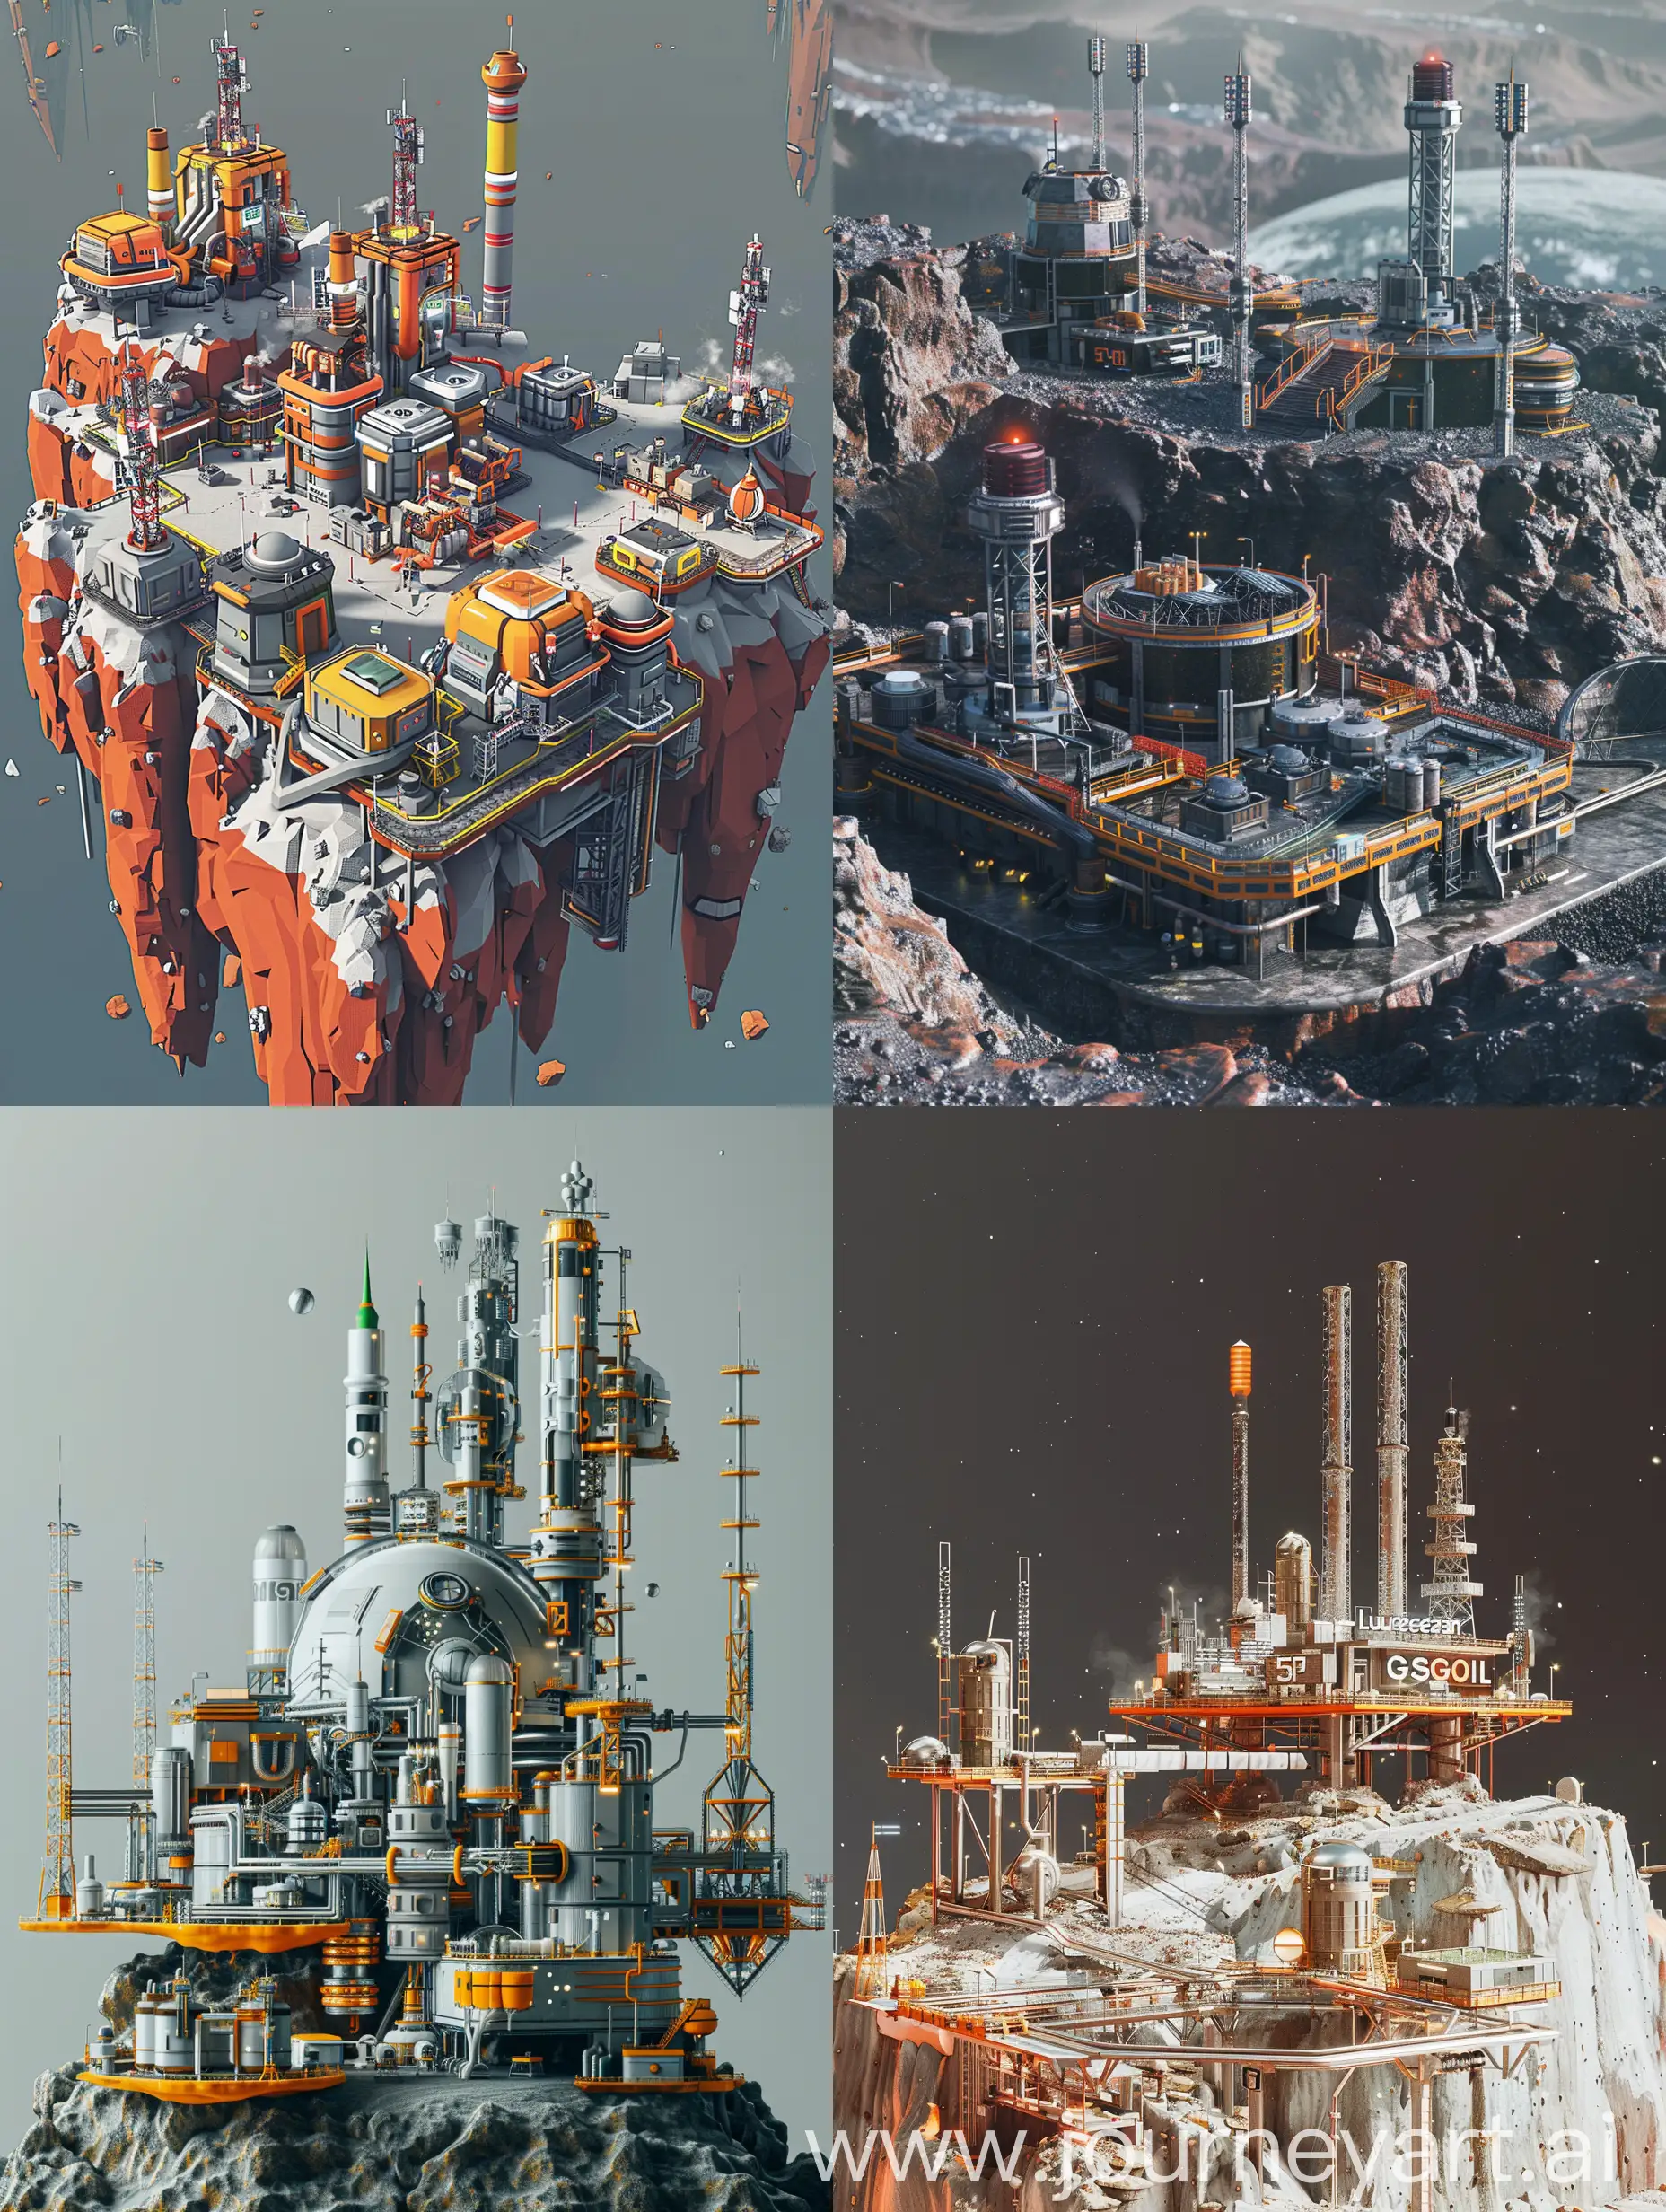 high-tech minimalistic alien station on a rock planet, including an oil refinery, oil production plant, airfield infrastructure, spaceport infrastructure, 5G towers, thermonuclear reactor and nuclear power plant, high-tech city farm Vertical farming aeroponics (With factories Gnomeregan, Phosagro, Lukoil, in high-tech style, with high-tech towers and advanced city farms in cyberpunk high-tech style from highly developed aliens)